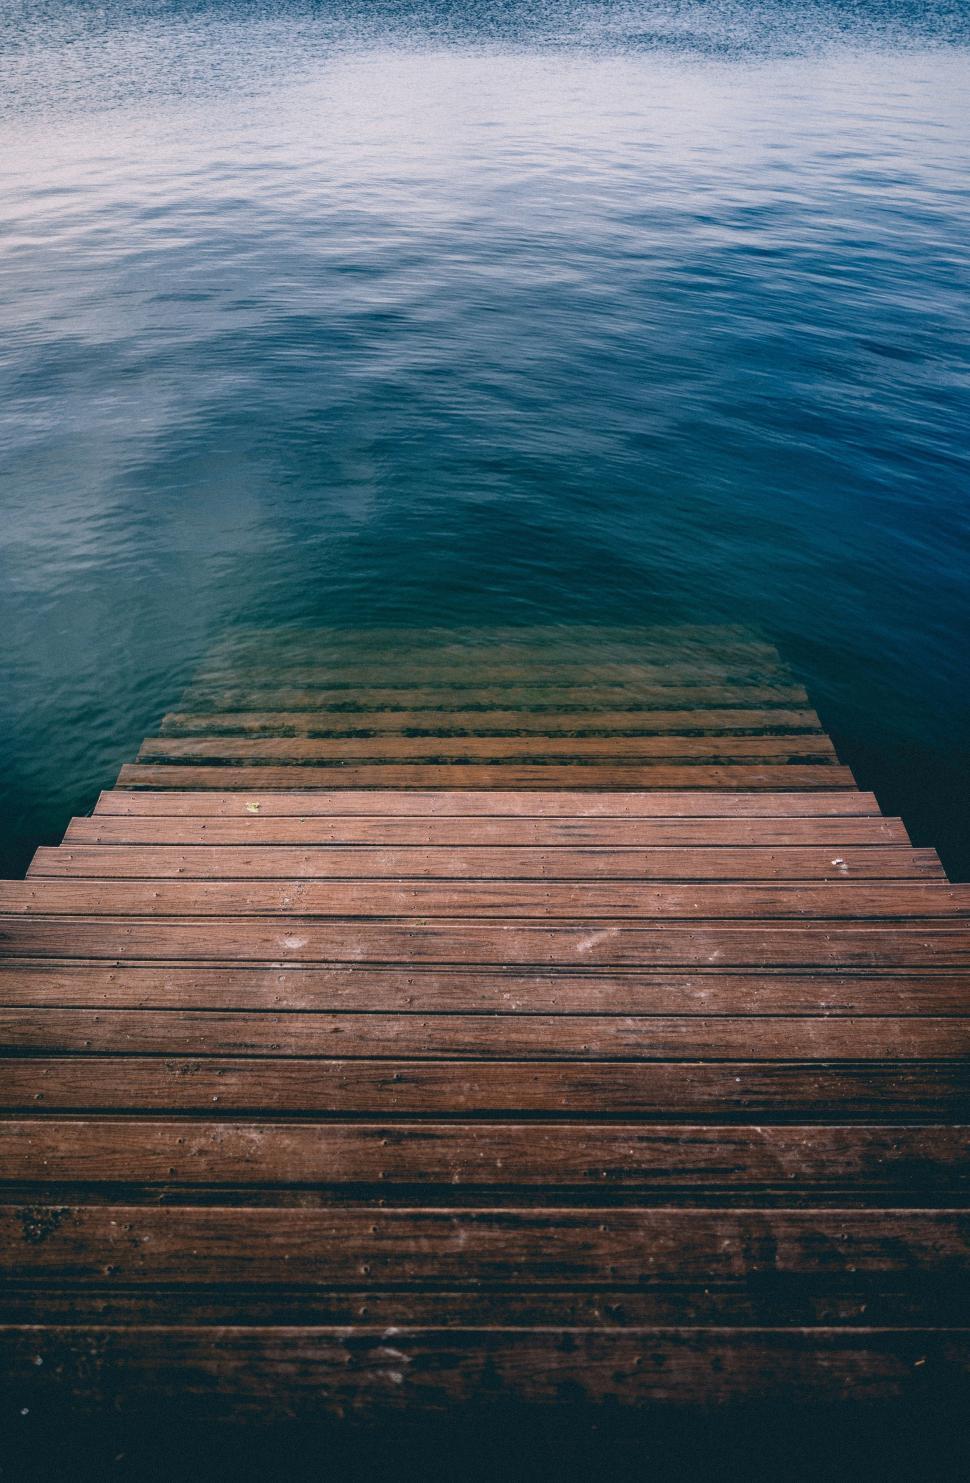 Free Image of Wooden Dock in the Middle of a Body of Water 